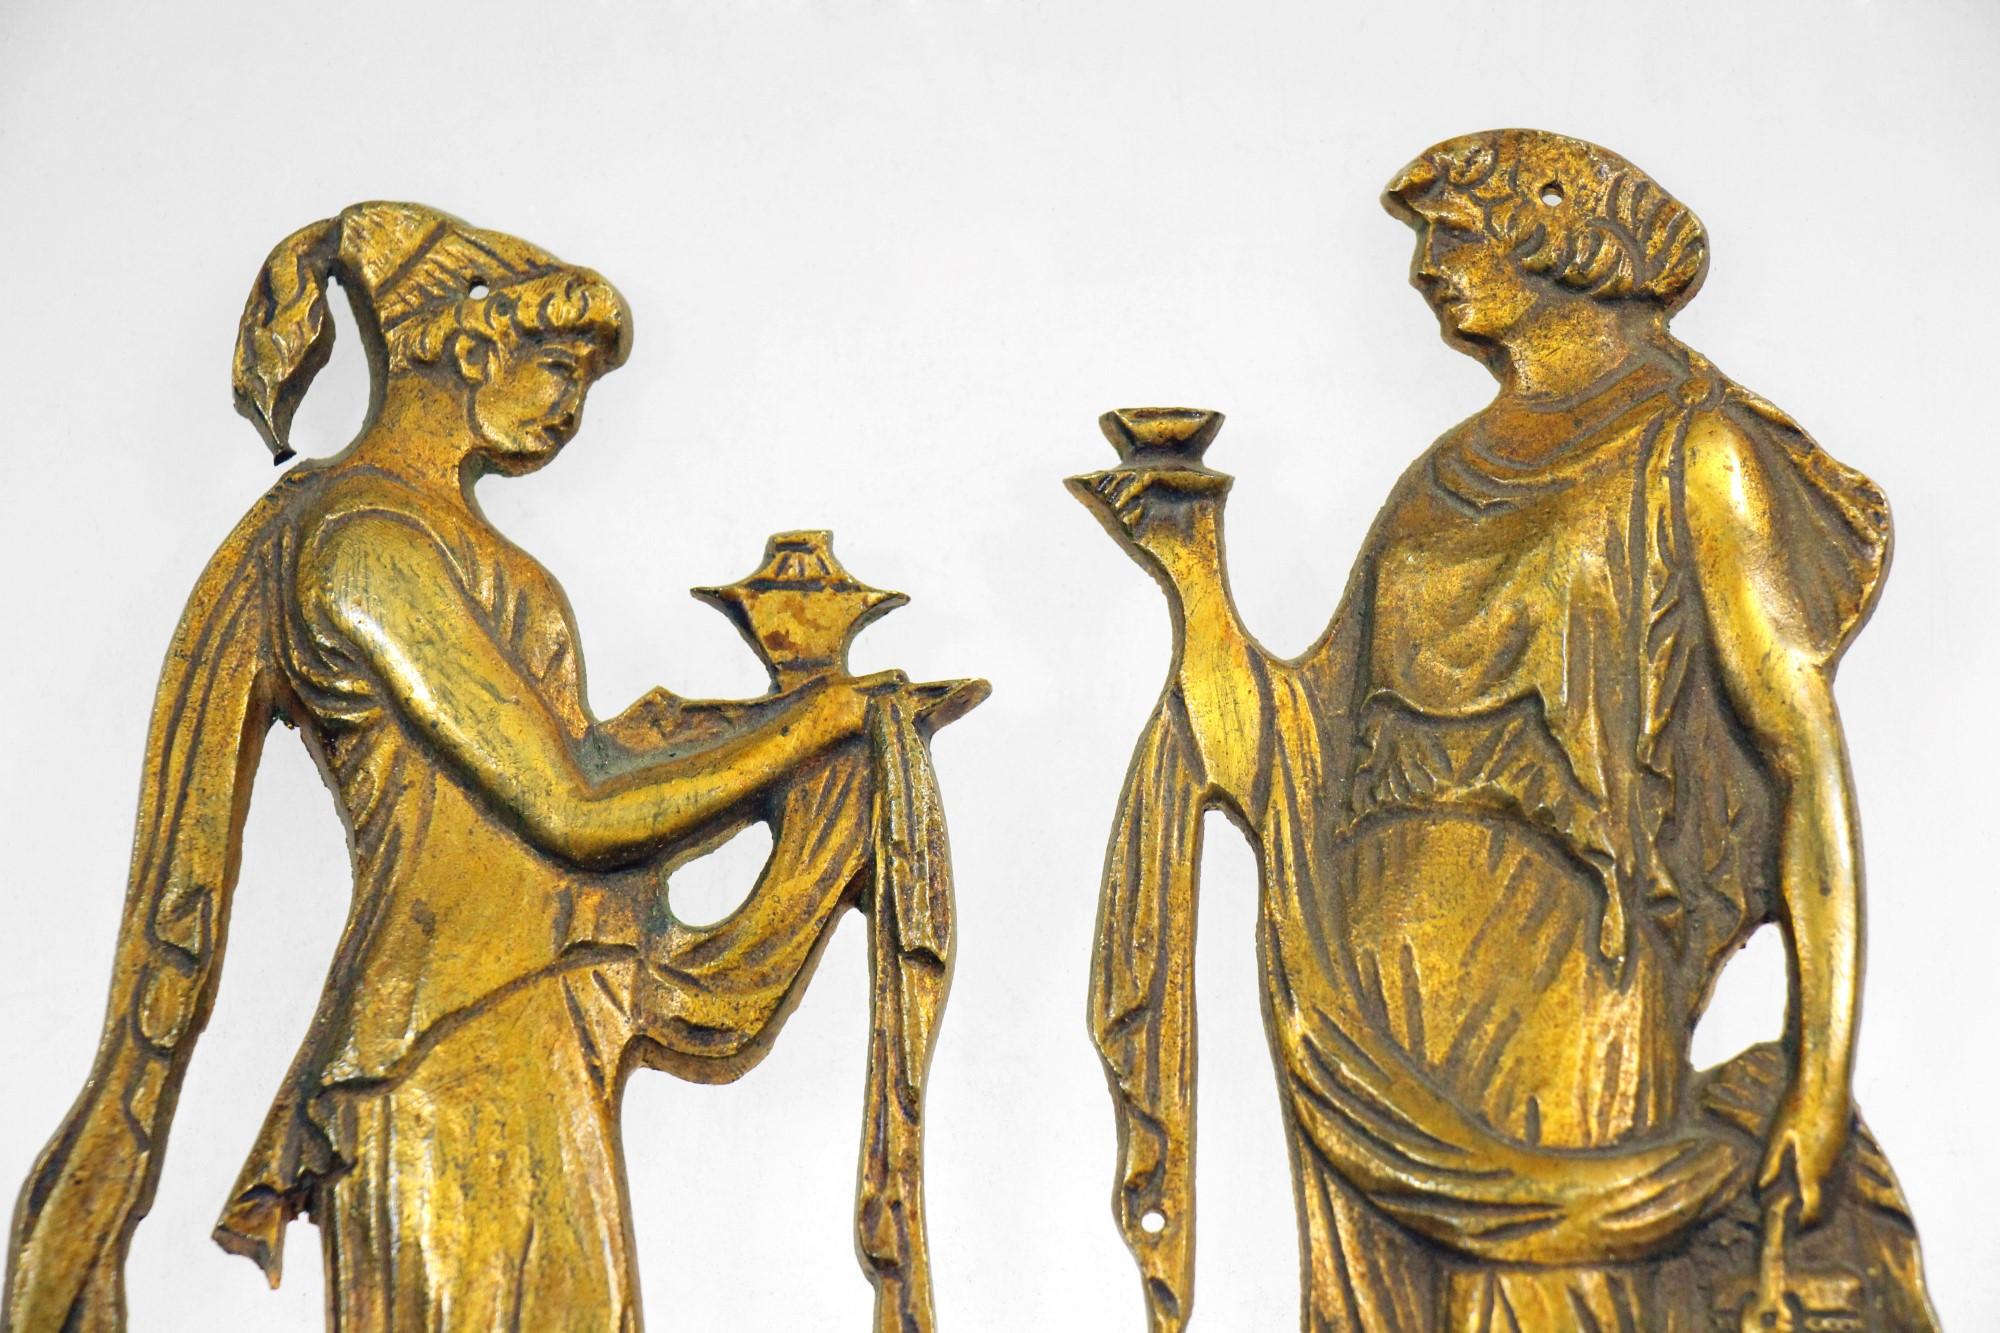 A detailed cast brass set of artistic Roman figures furniture accents from Belgium. These accents can be anchored to a furniture piece to add interest or can be used in other possible artistic applications.